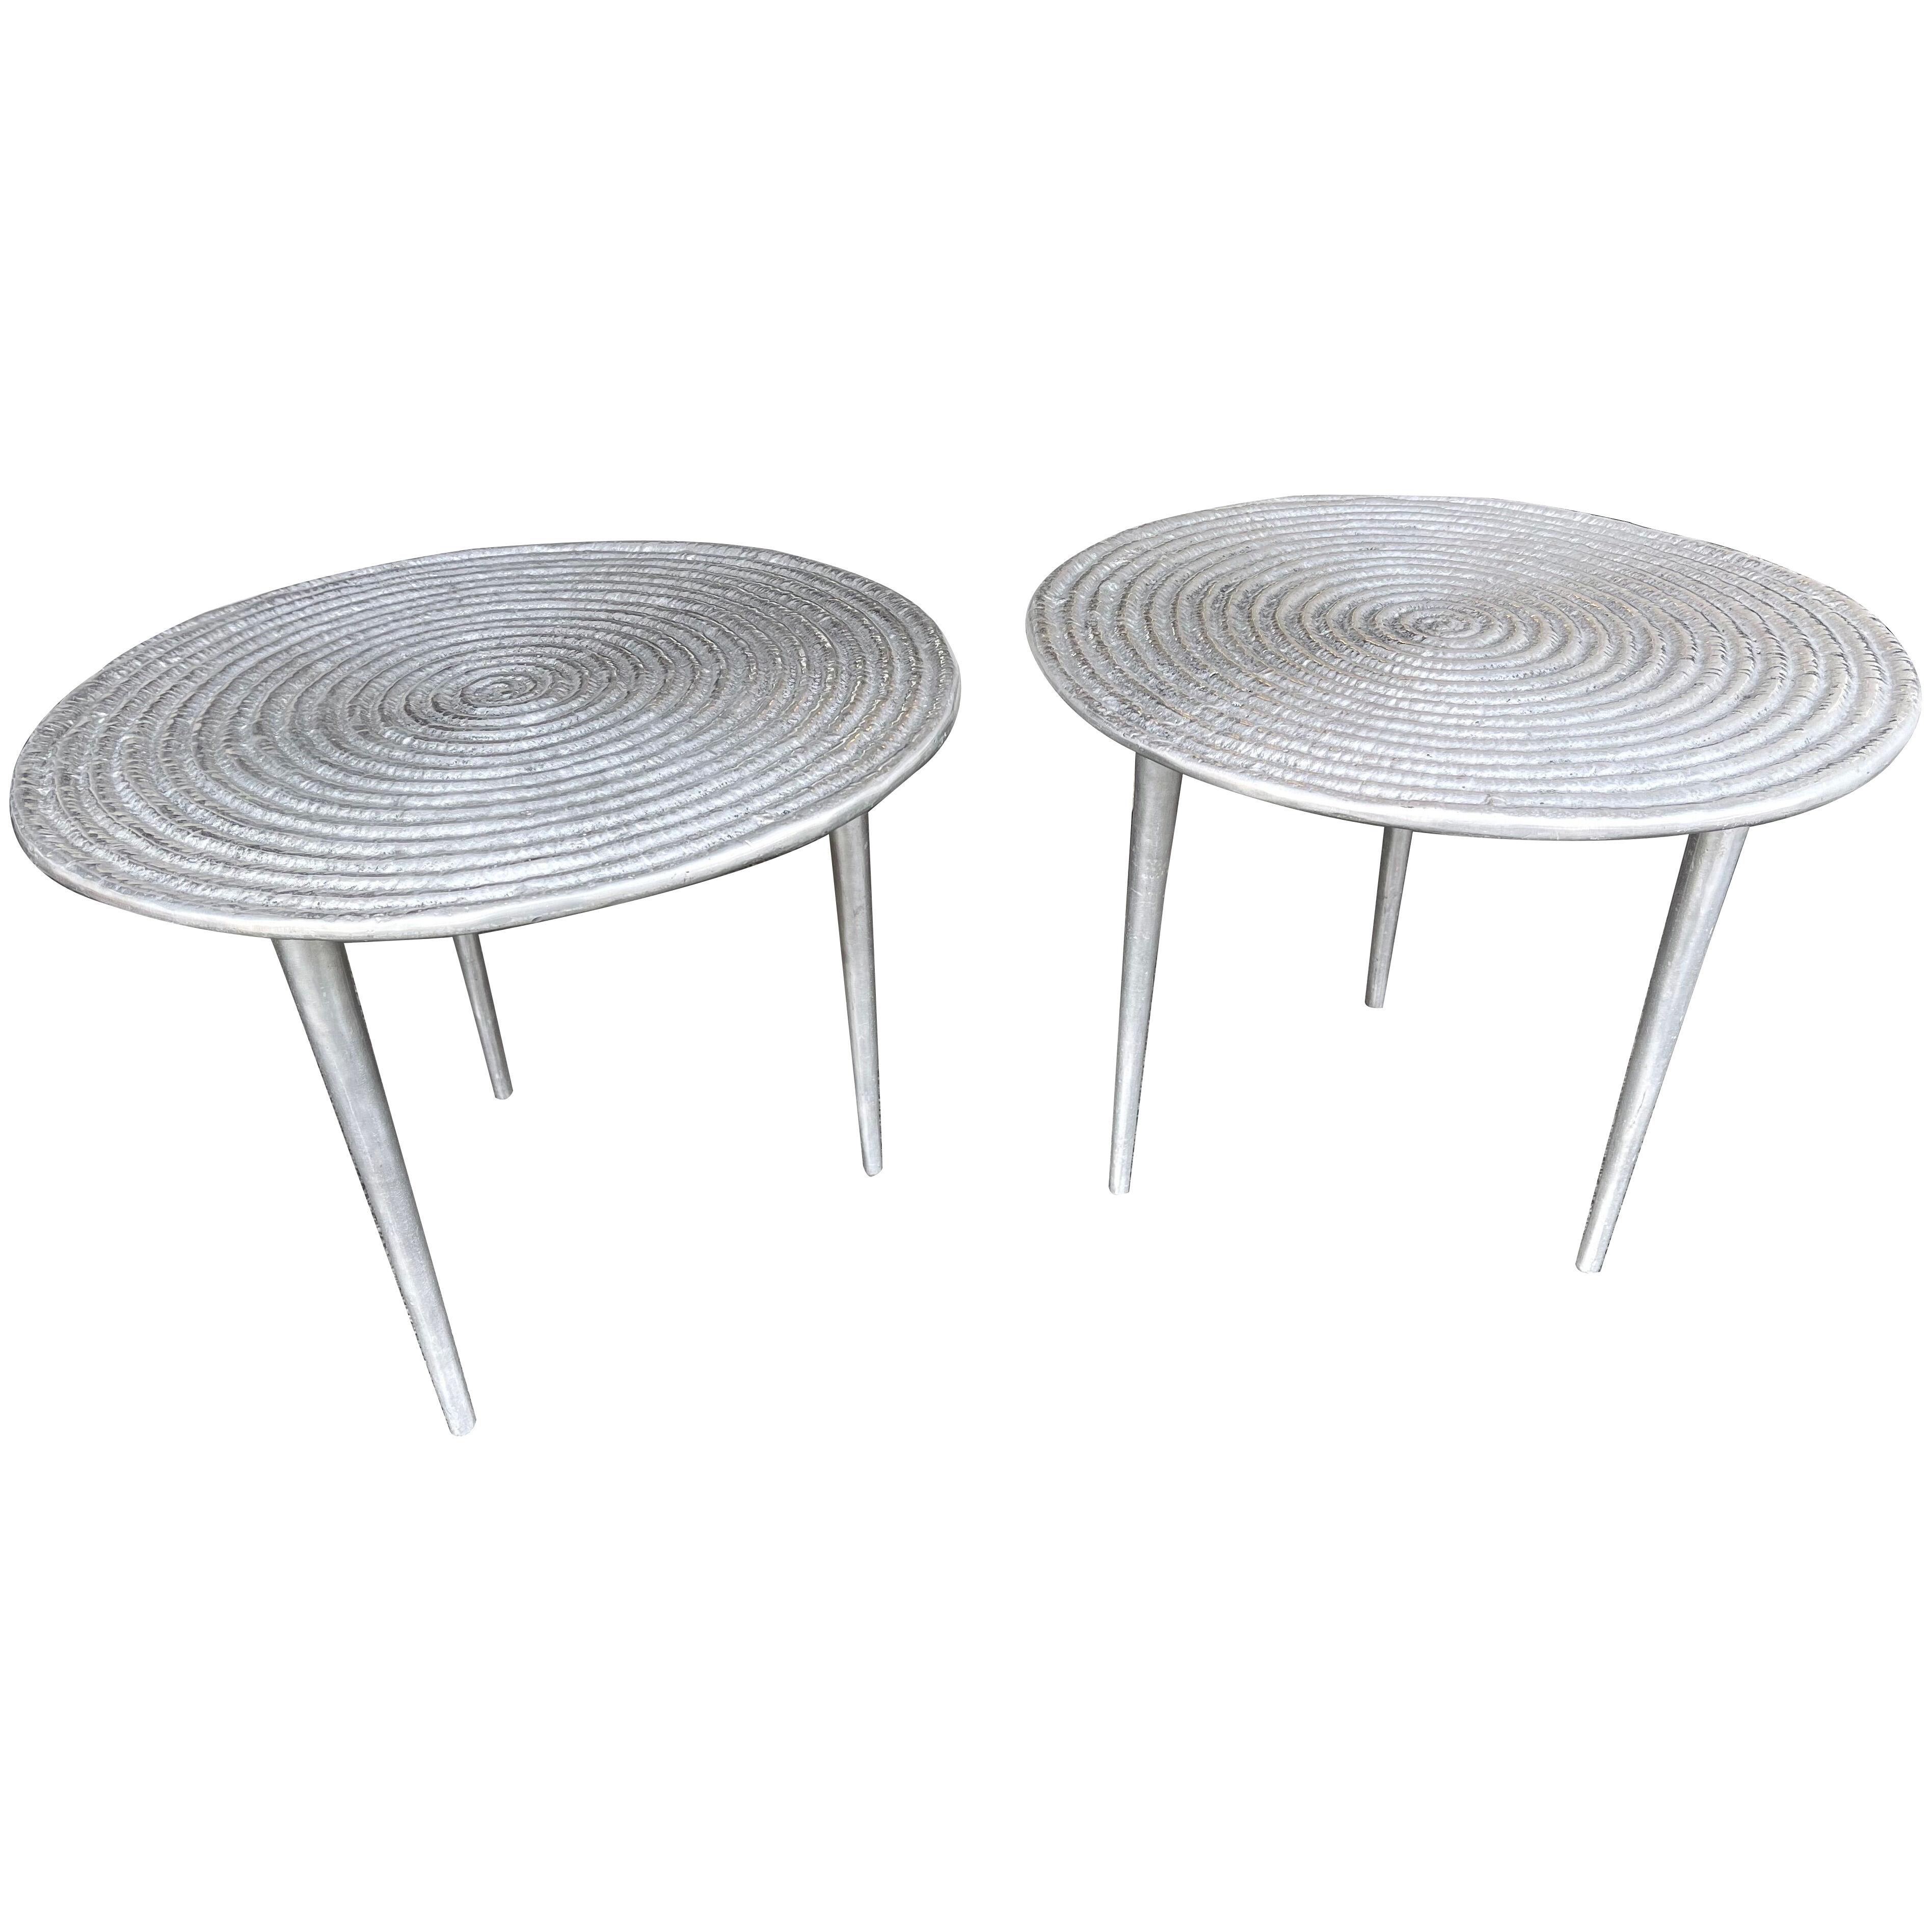 Pair of Cast Metal Side Tables. Italy, 1990s